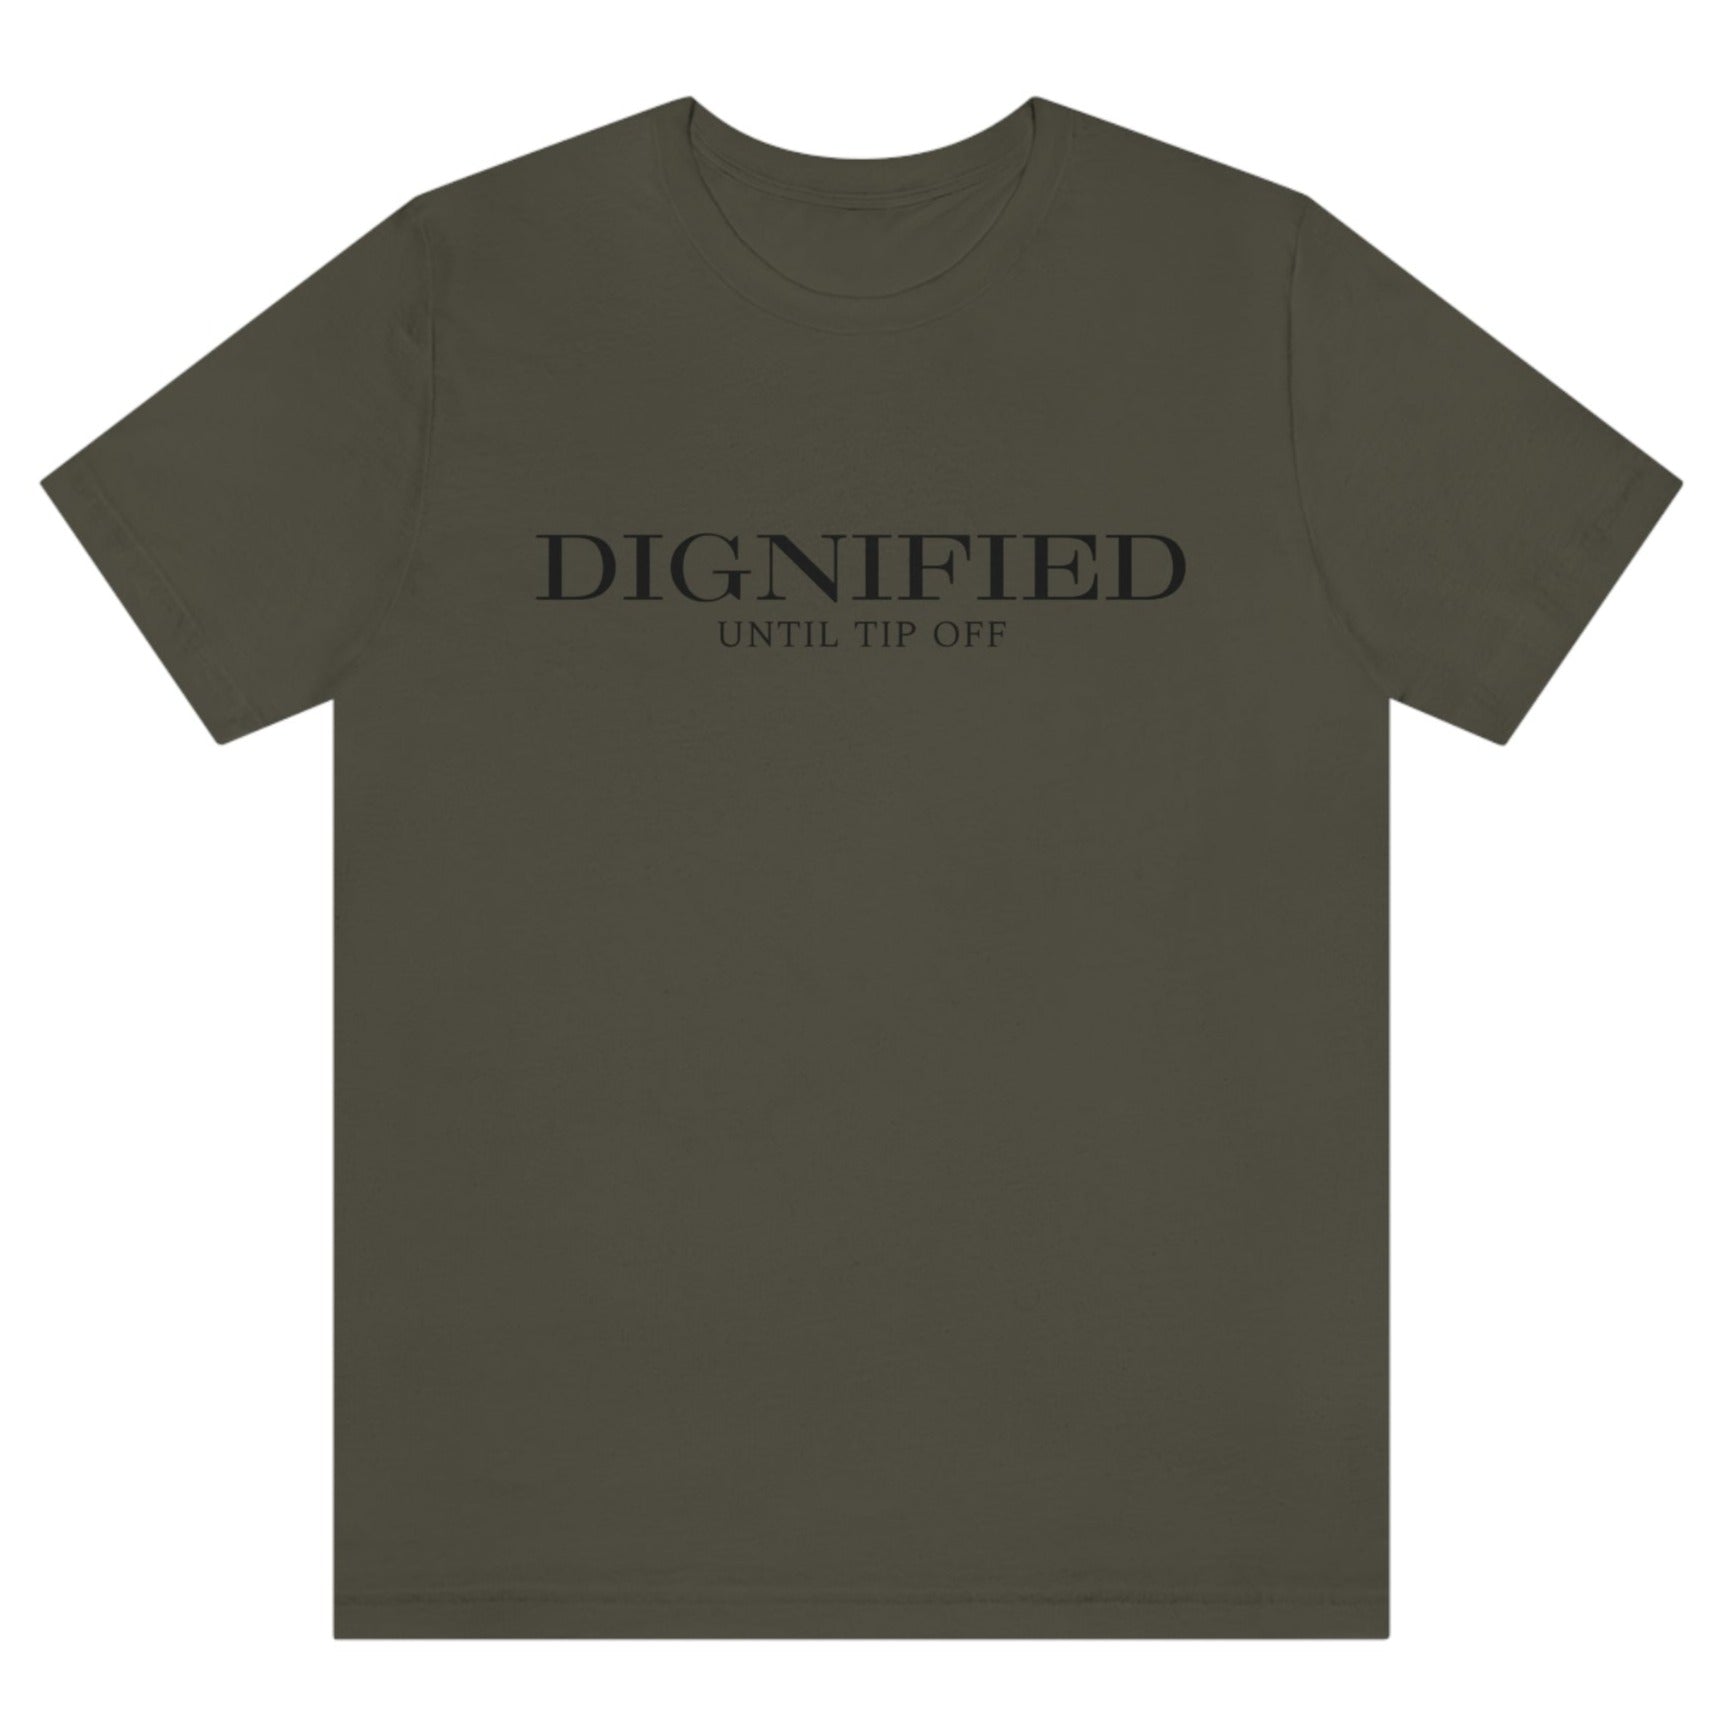 dignified-until-tipoff-army-green-t-shirt-mens-sports-basketball